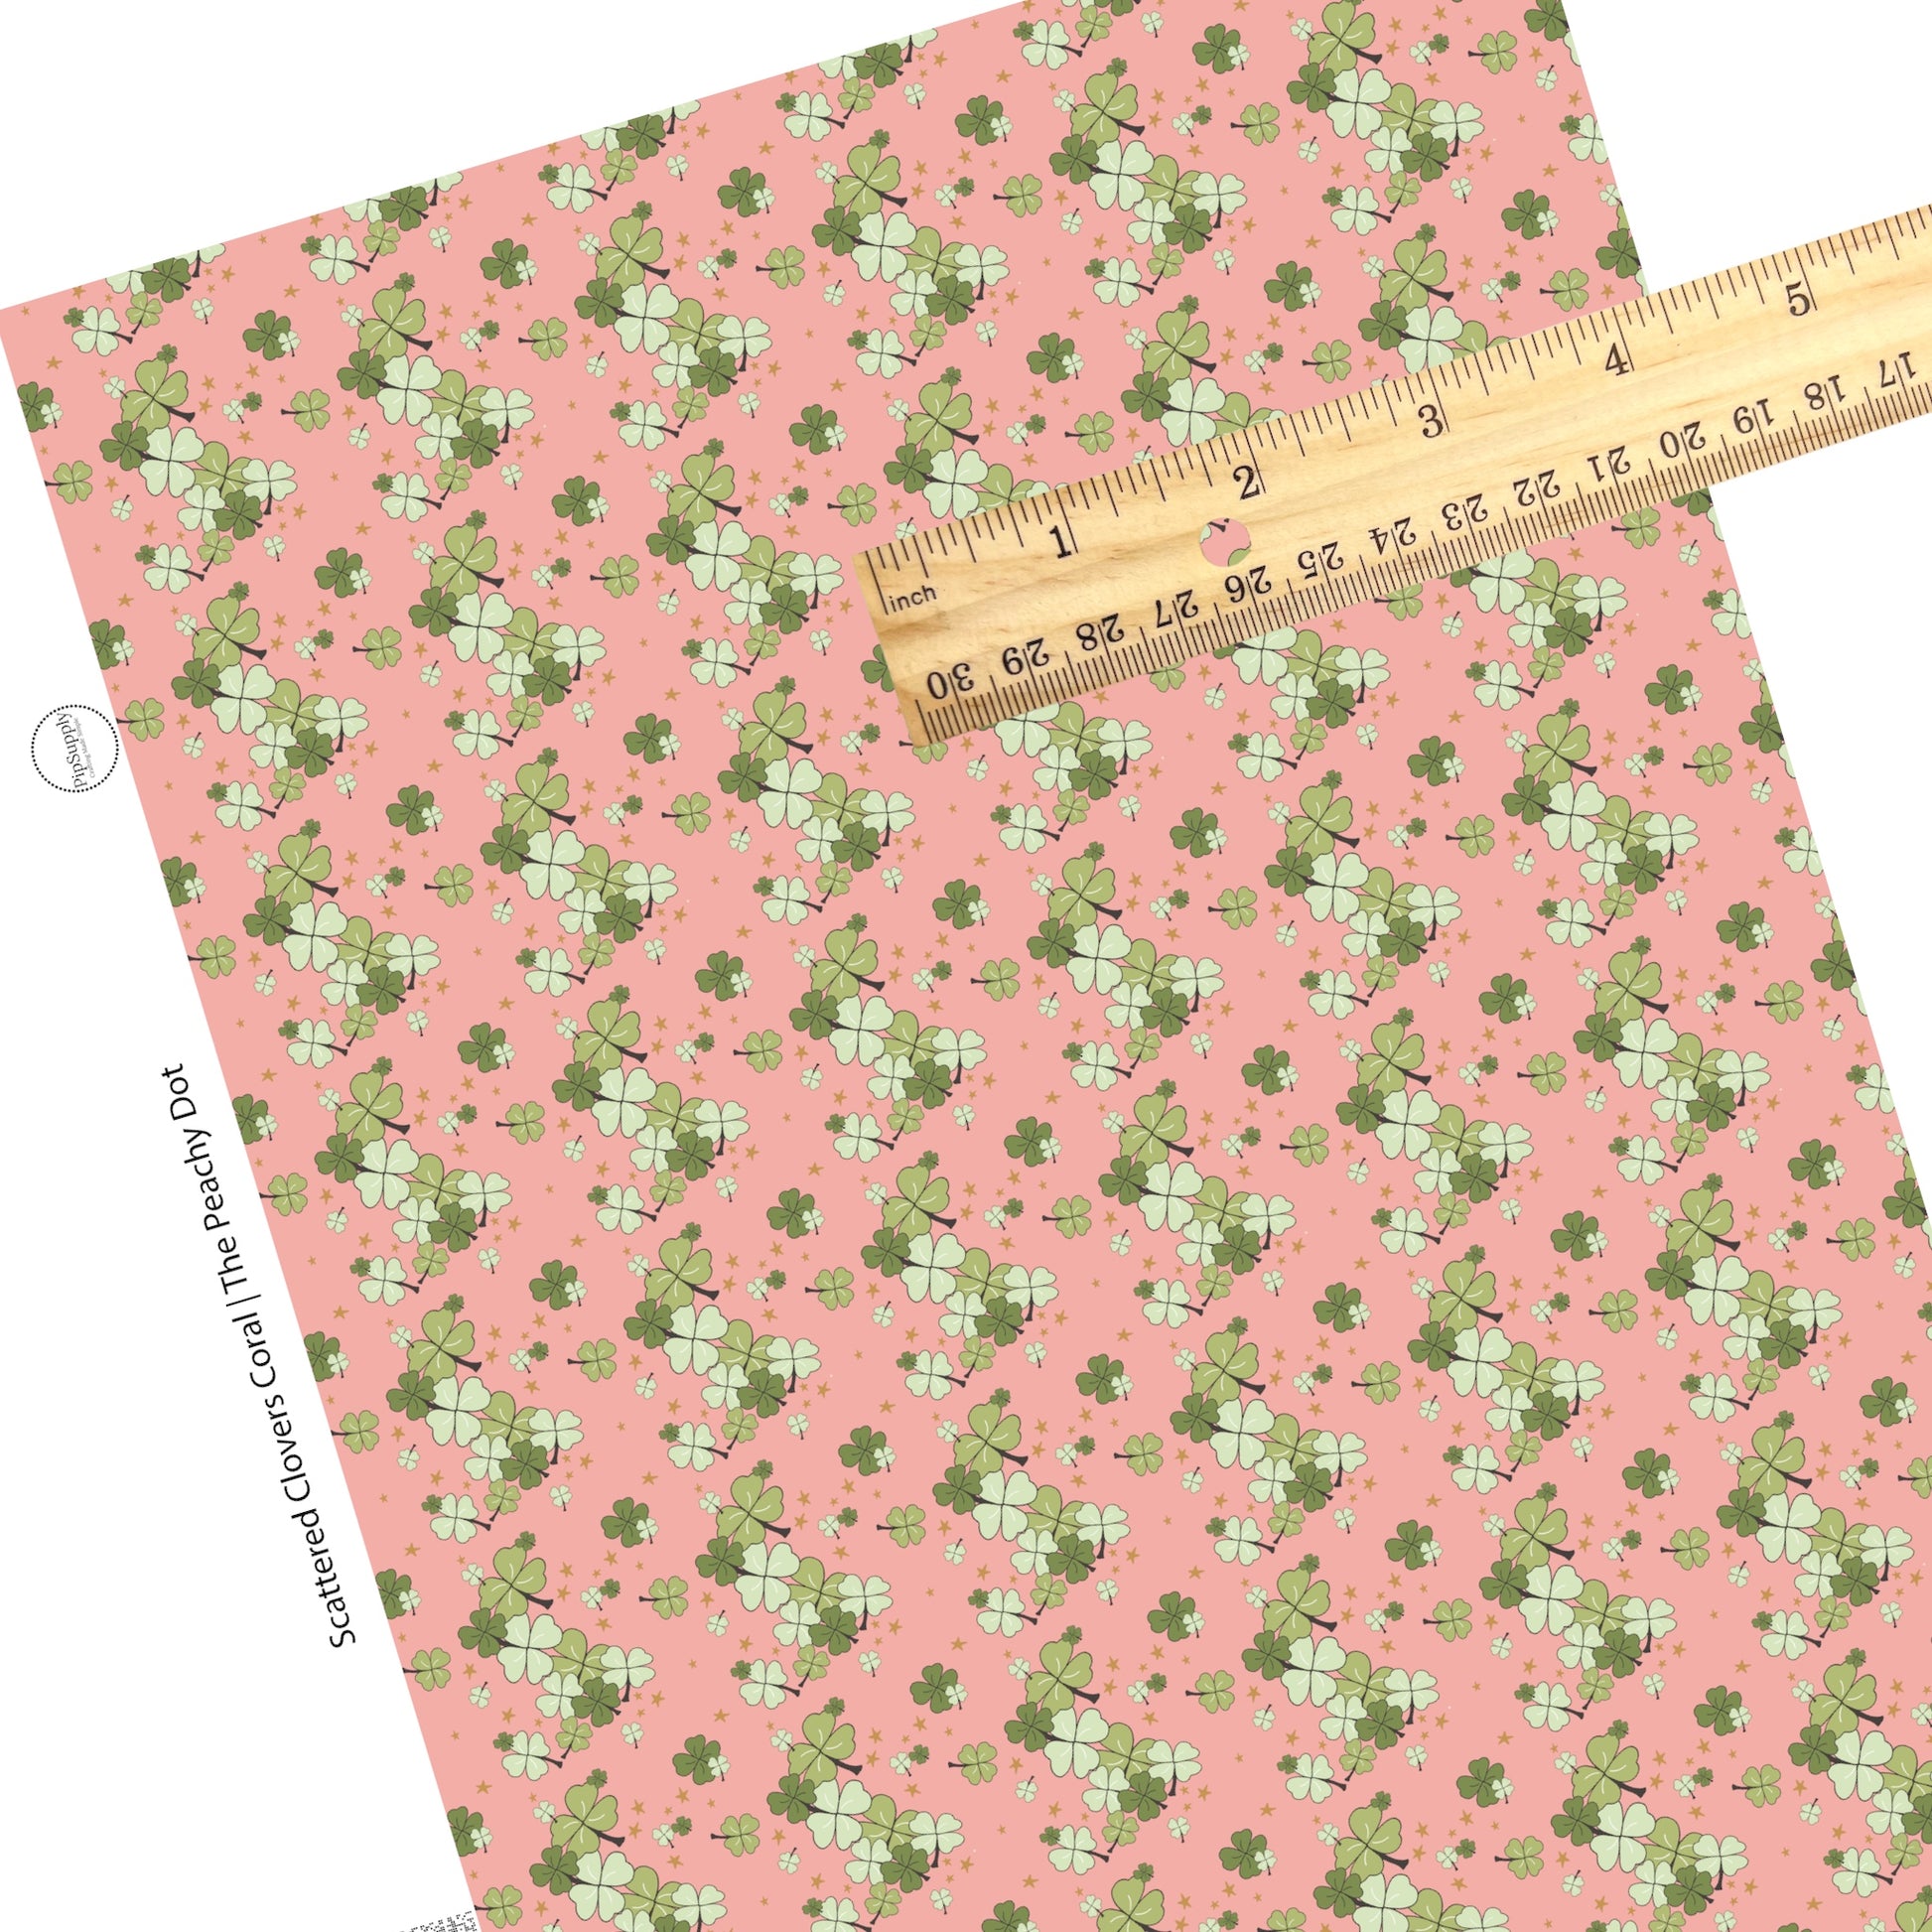 Dark green and light green different sized clovers on a coral faux leather sheet